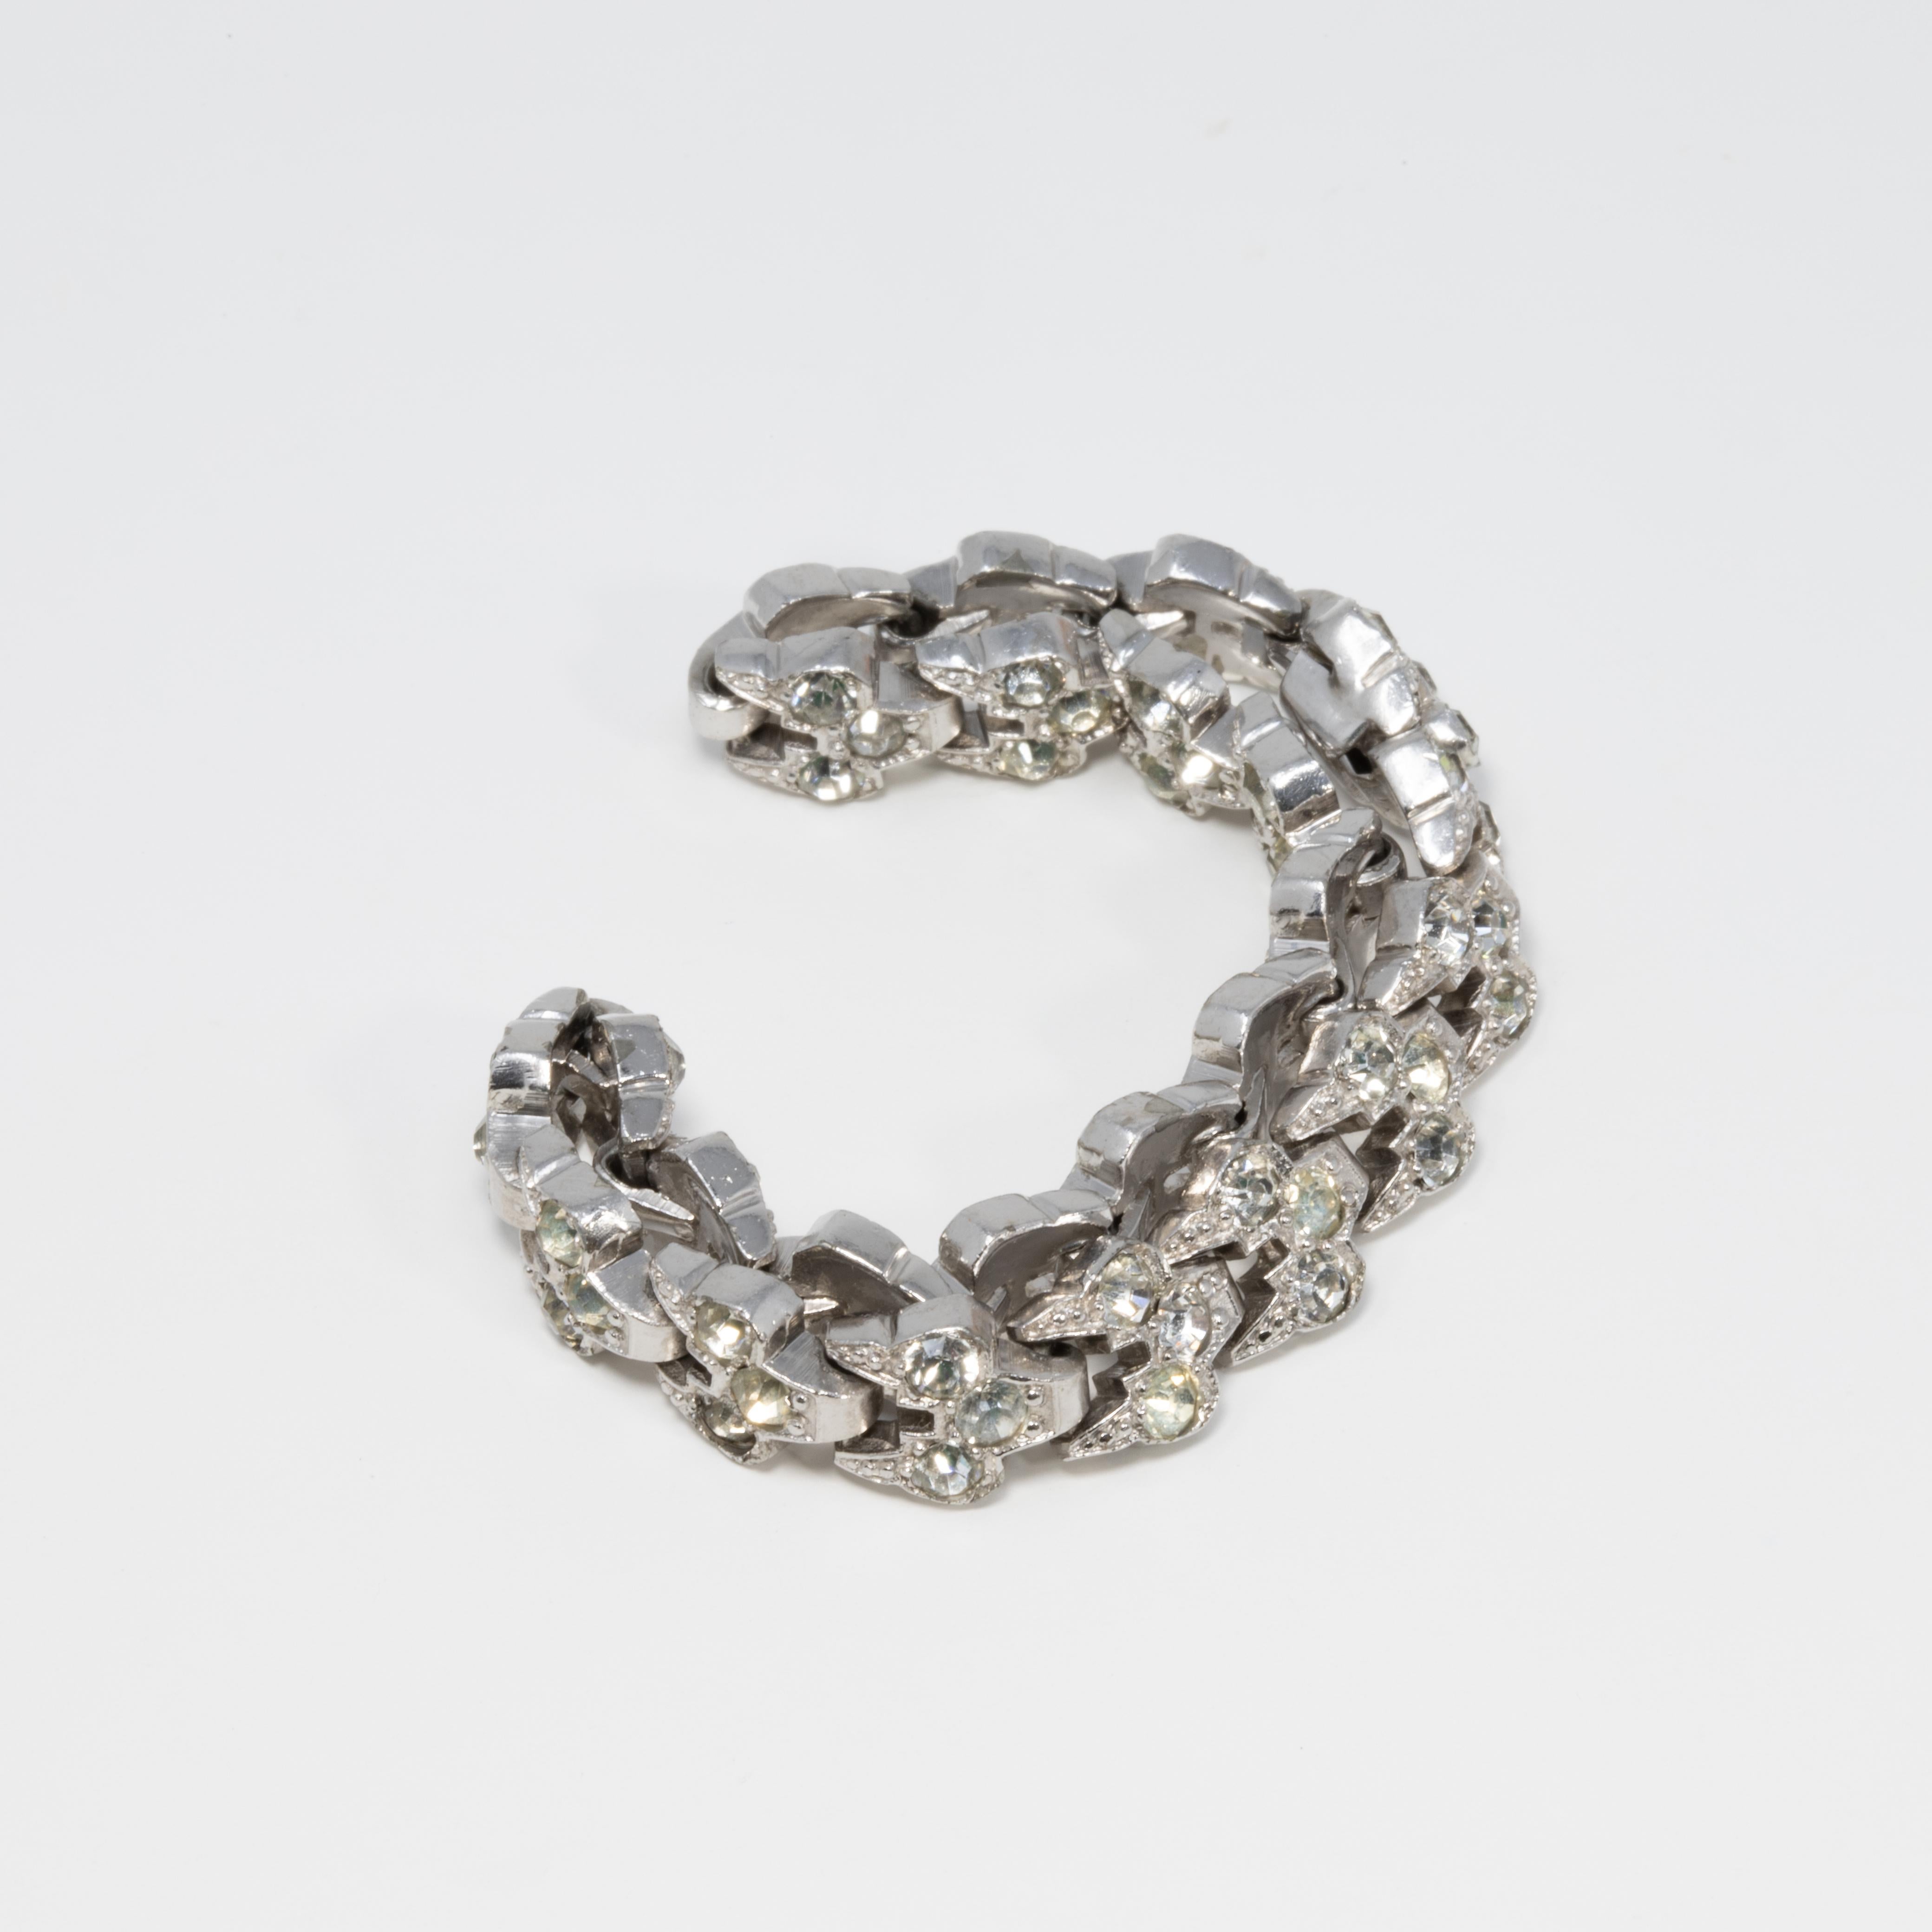 A rhodium-plated link bracelet accented with clear crystals. Fastened with a vintage box clasp mechanism. A brilliant shine!